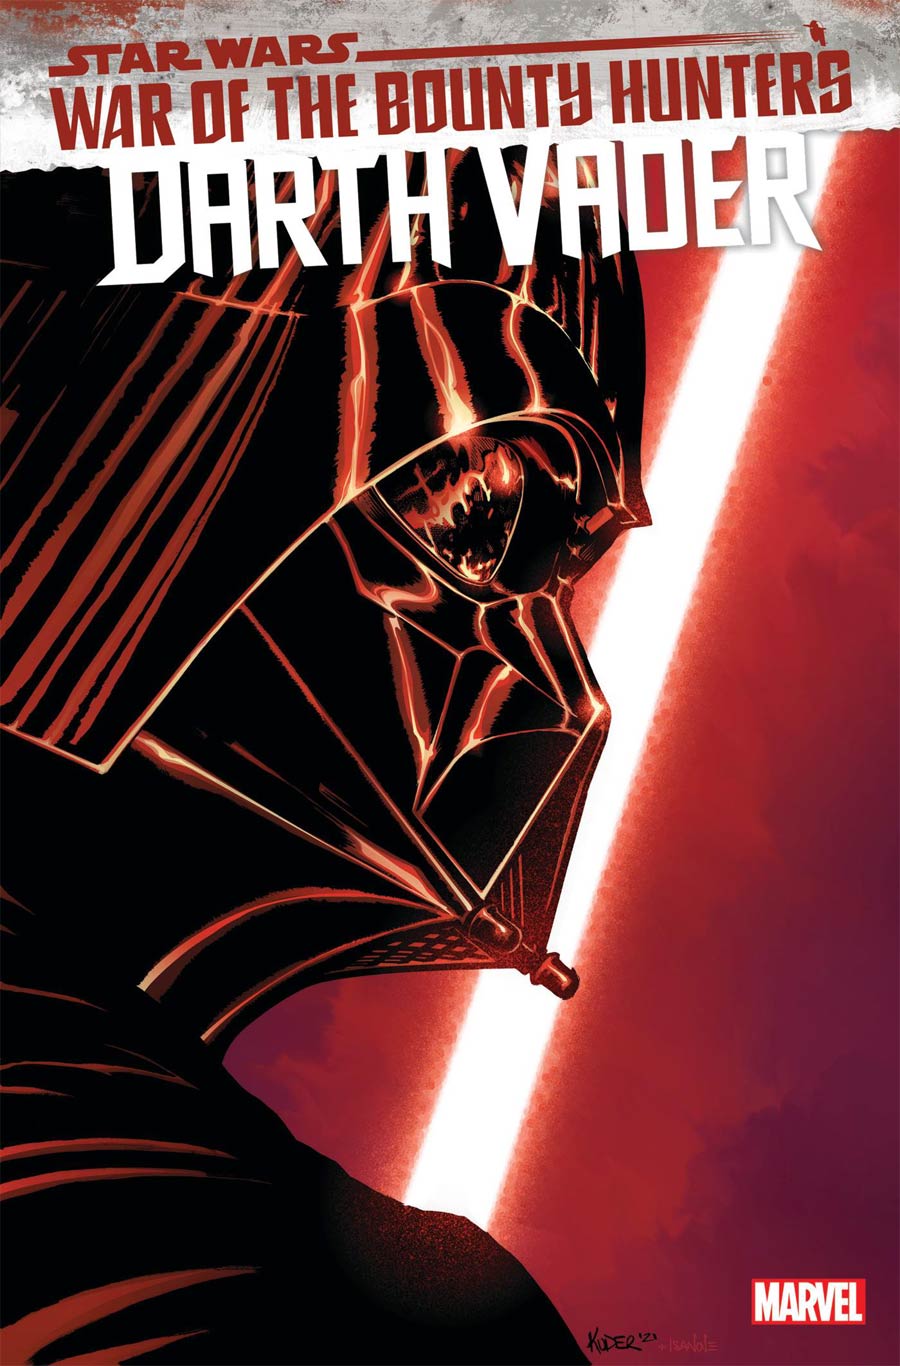 Star Wars Darth Vader #17 Cover A Regular Aaron Kuder Cover (War Of The Bounty Hunters Tie-In)